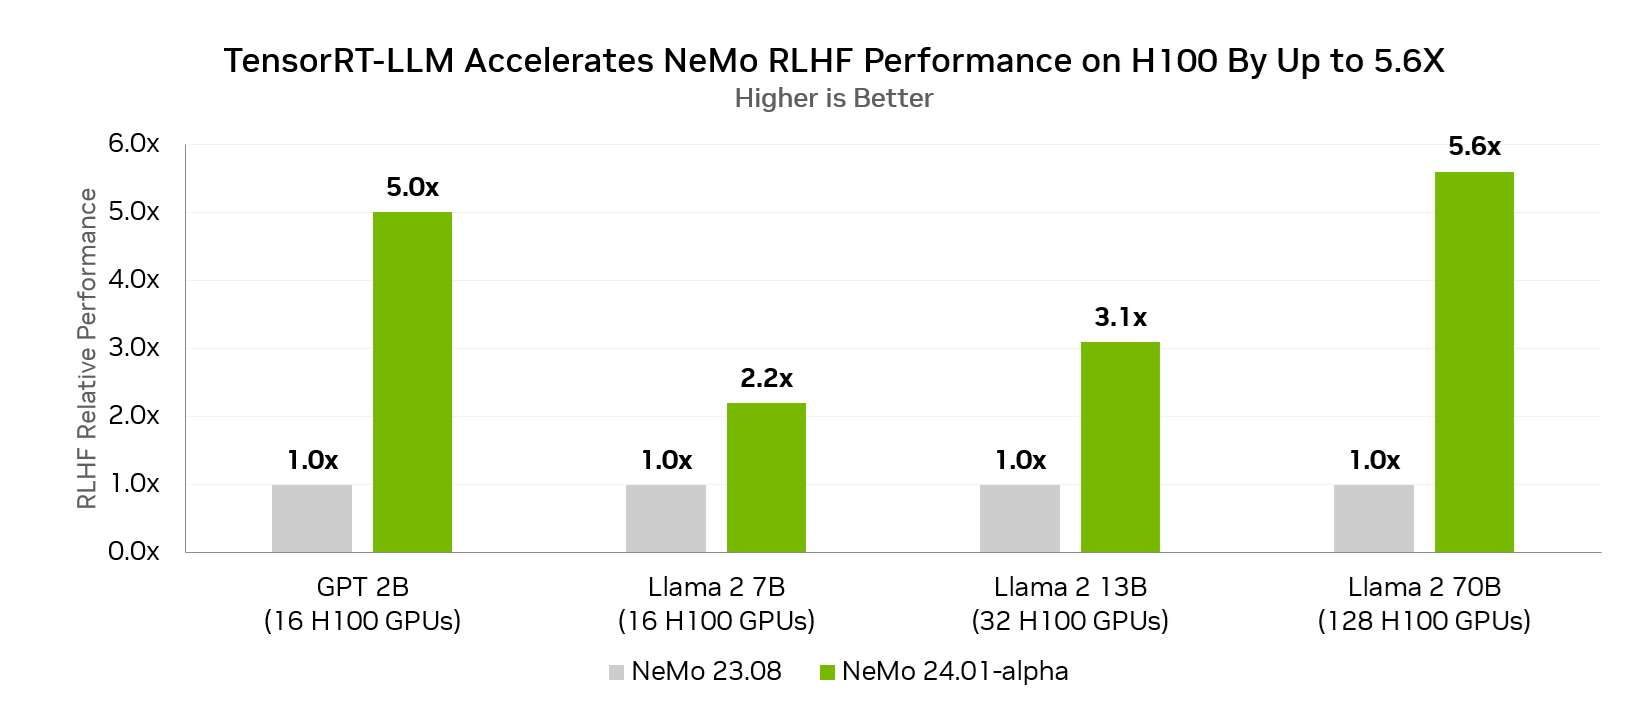 A chart showing the relative performance of H100 using the latest NeMo release for RLHF across four different models–GPT-2B, Llama 2 7B, Llama 2 13B, and Llama 2 70B–with respective H100 GPU counts of 16, 16, 32, and 128 compared to the prior NeMo release. Performance increases are 5x, 2.2x, 3.1x, and 5.6x, respectively.